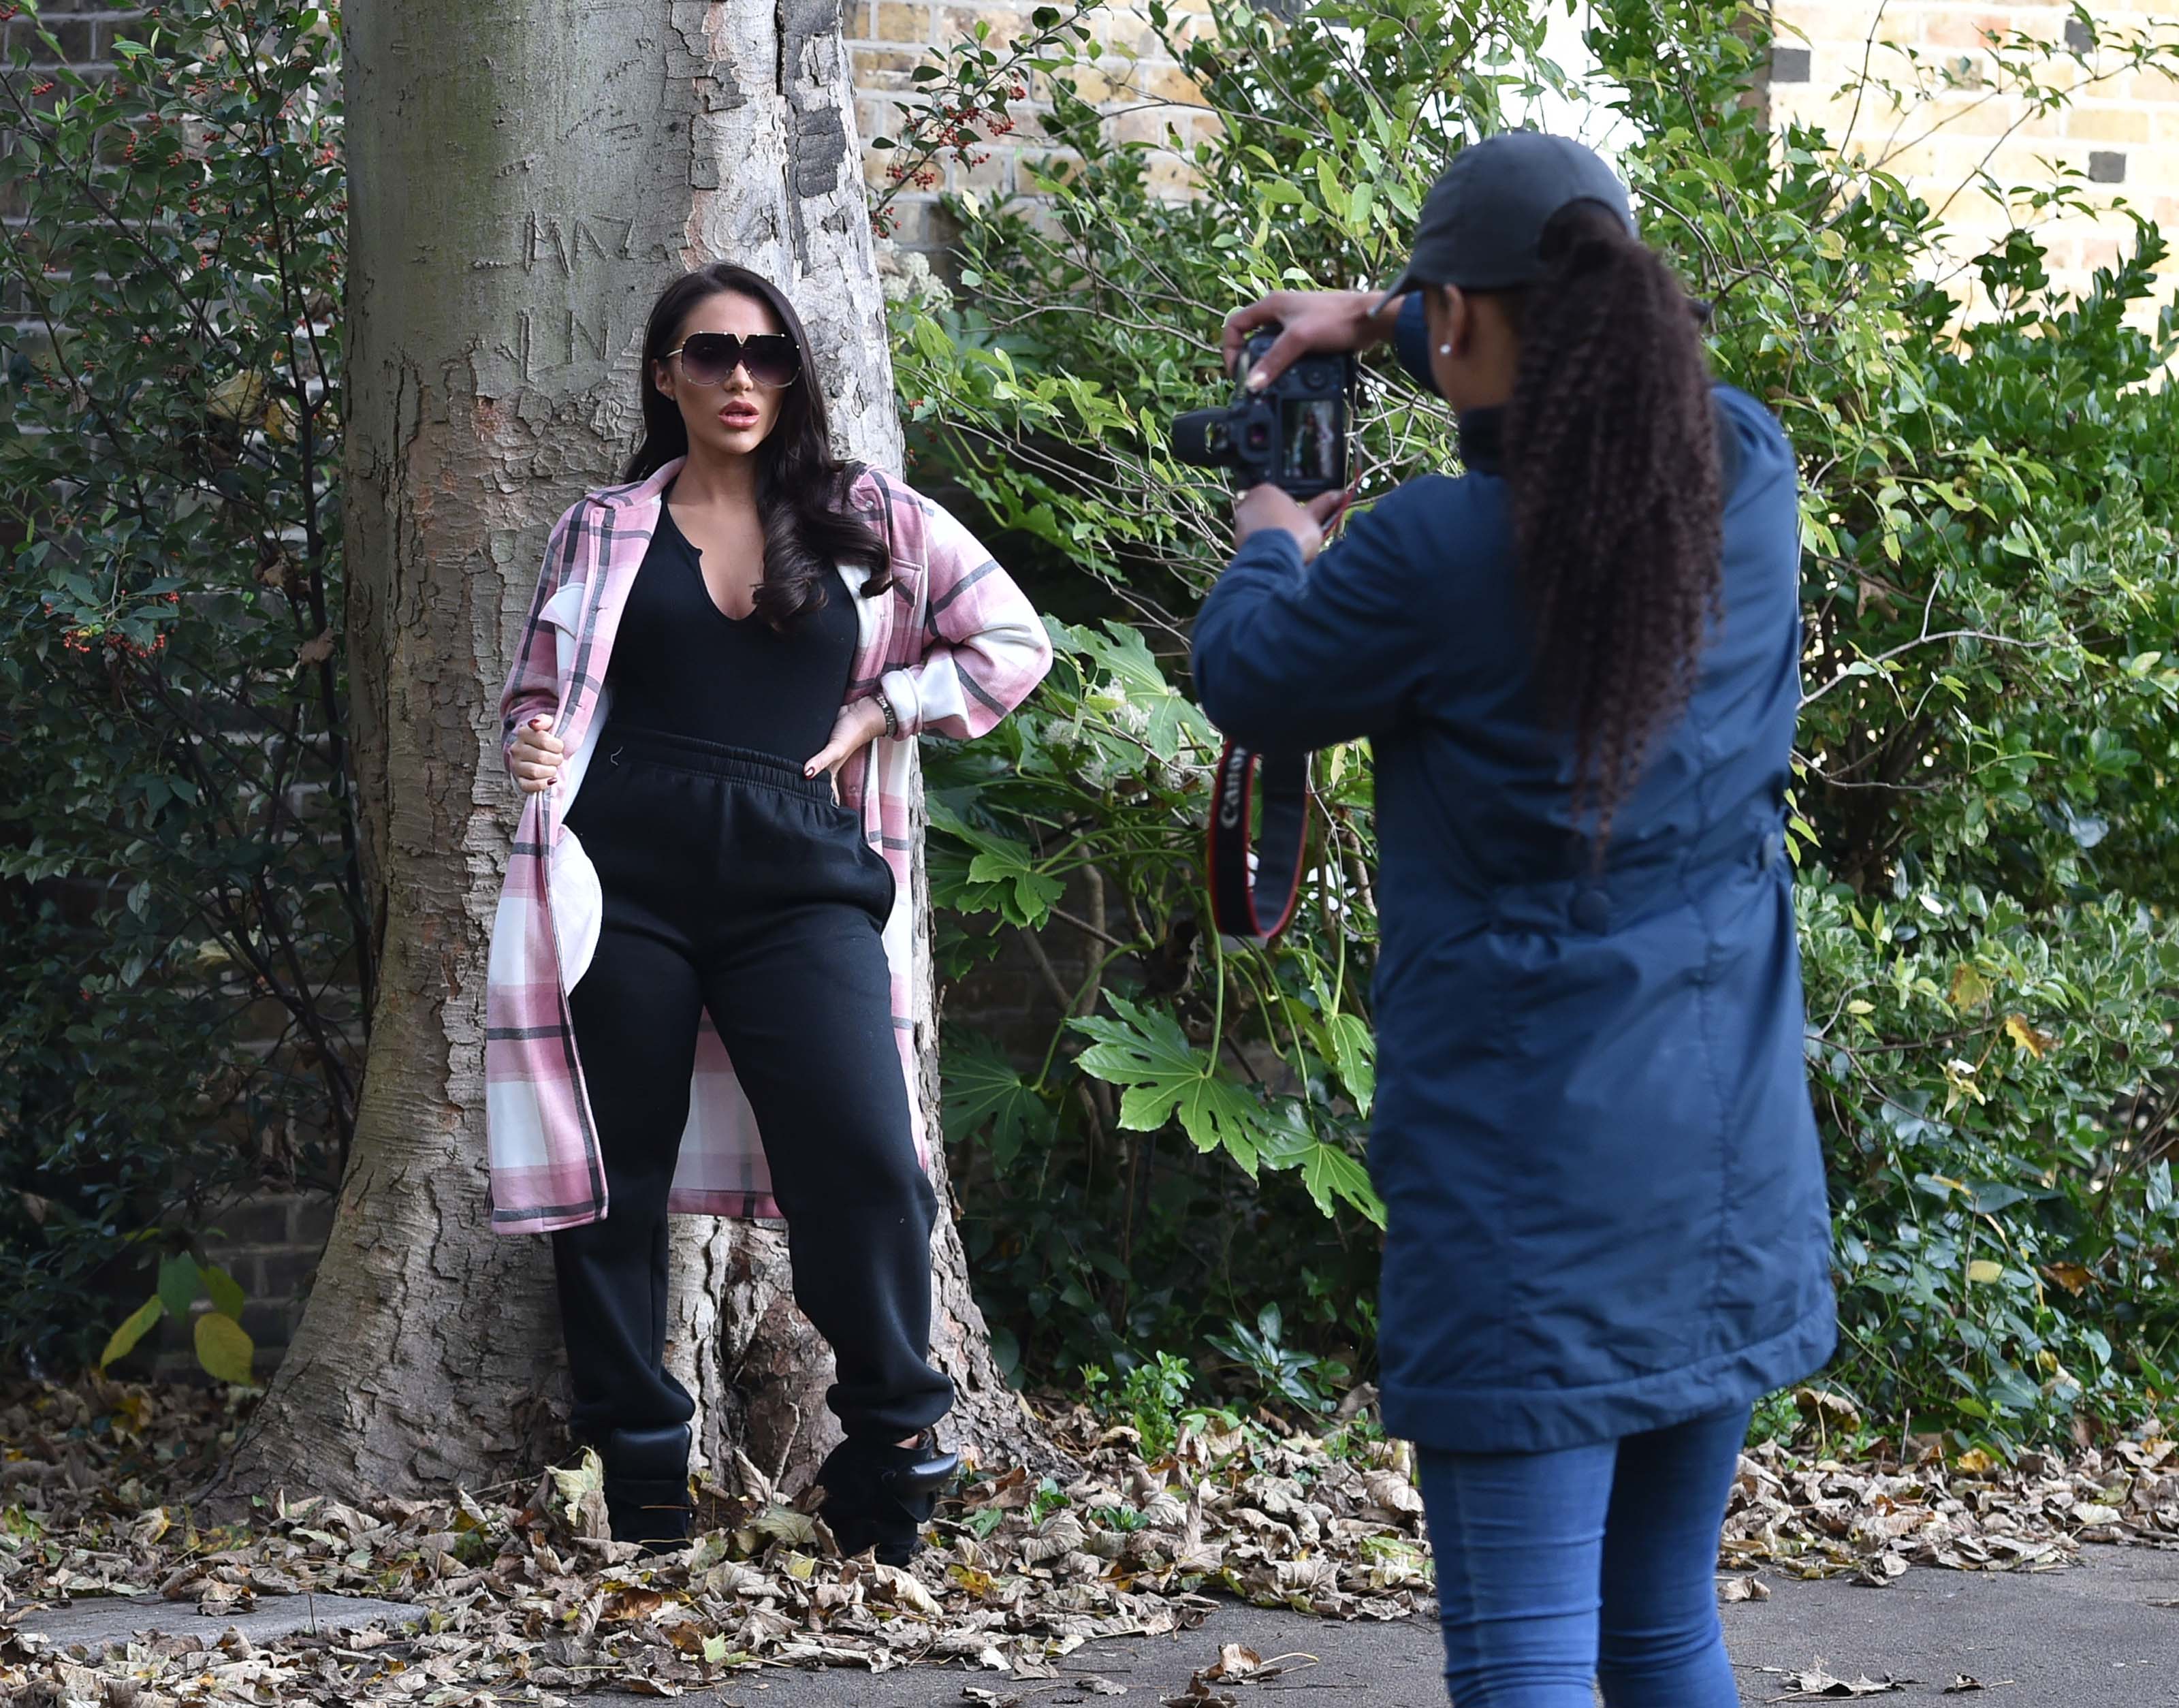 Chloe Brockett doing a photoshoot for the hella shop clothing brand in Brentwood, Essex